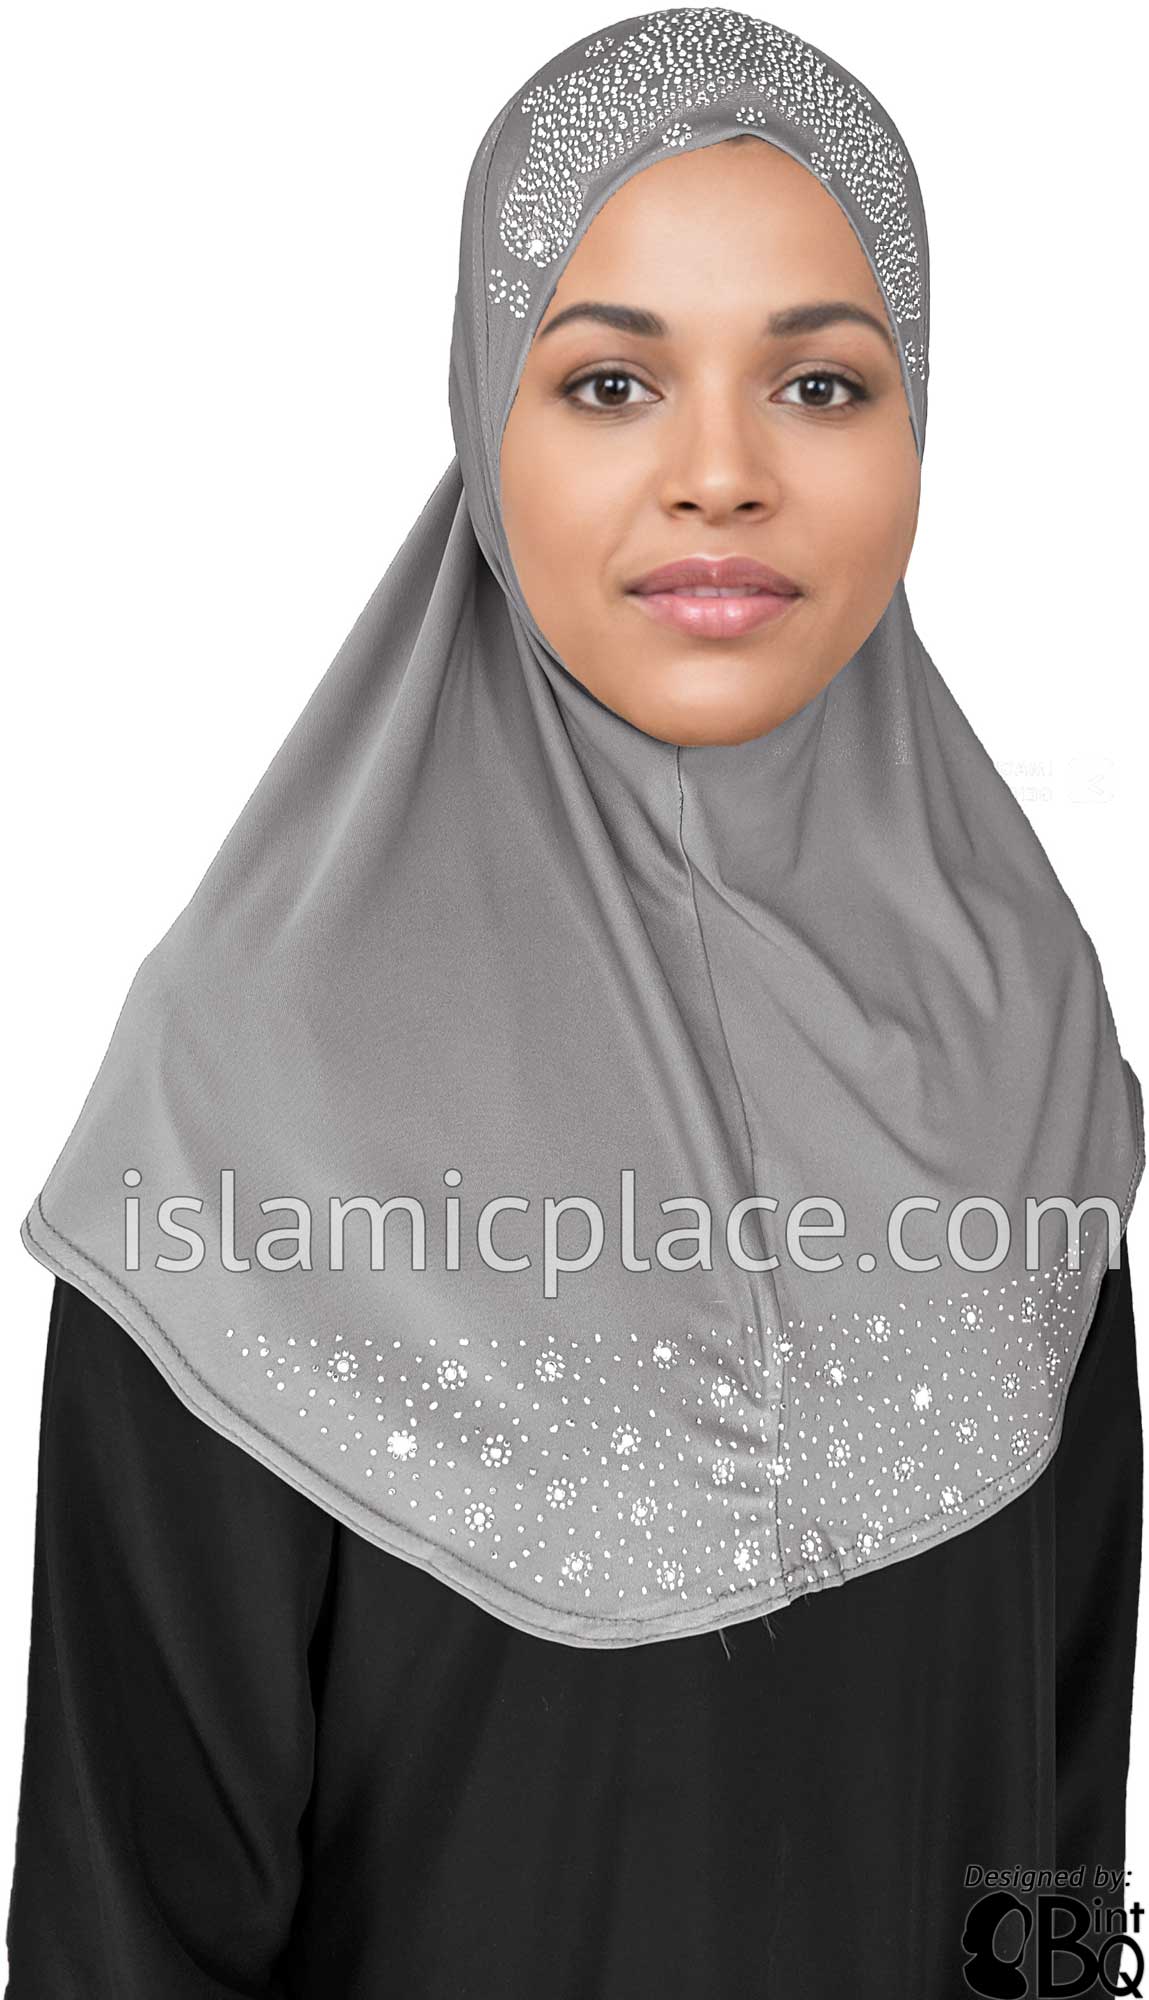 Slate Gray - Luxurious Lycra Hijab Al-Amira with Silver Rhinestones Teen to Adult (Large)